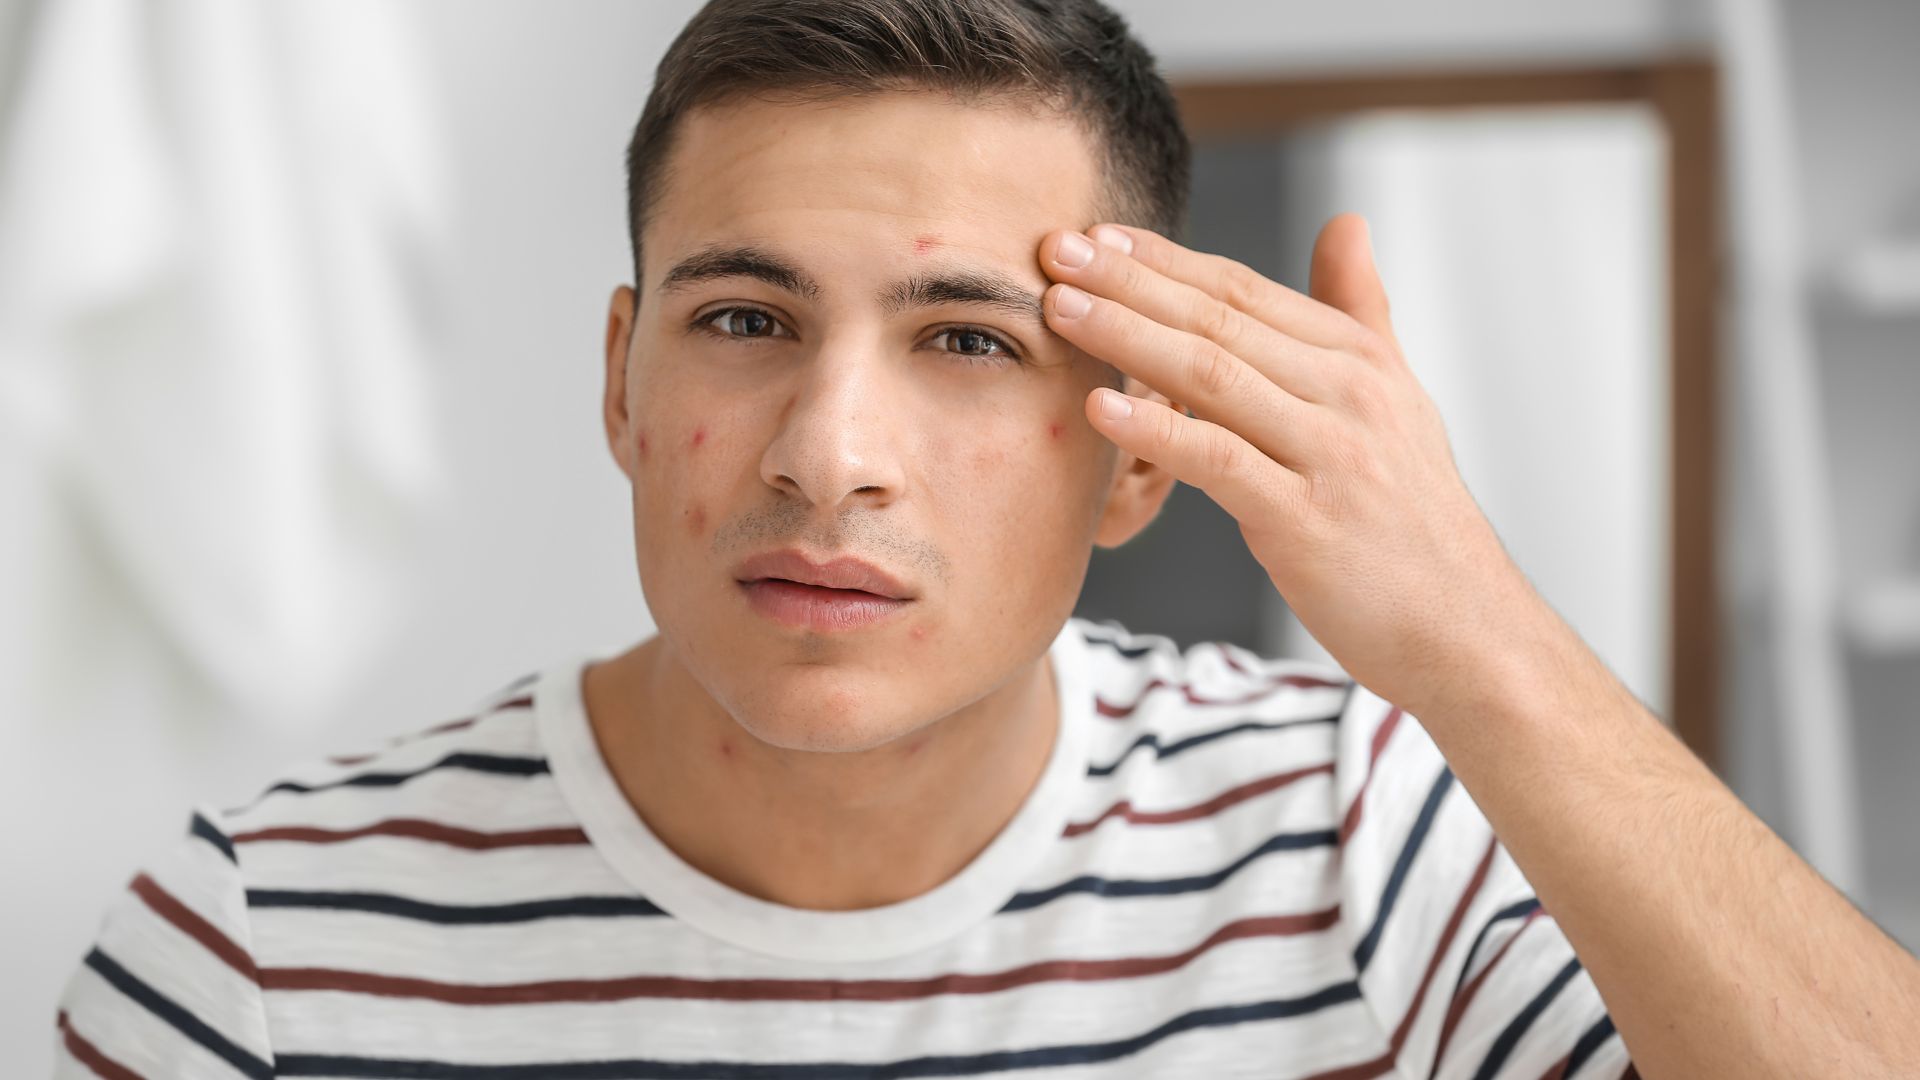 A man is experiencing discomfort on his face and seeks self-care for Hidradenitis Suppurativa Treatment at Home.